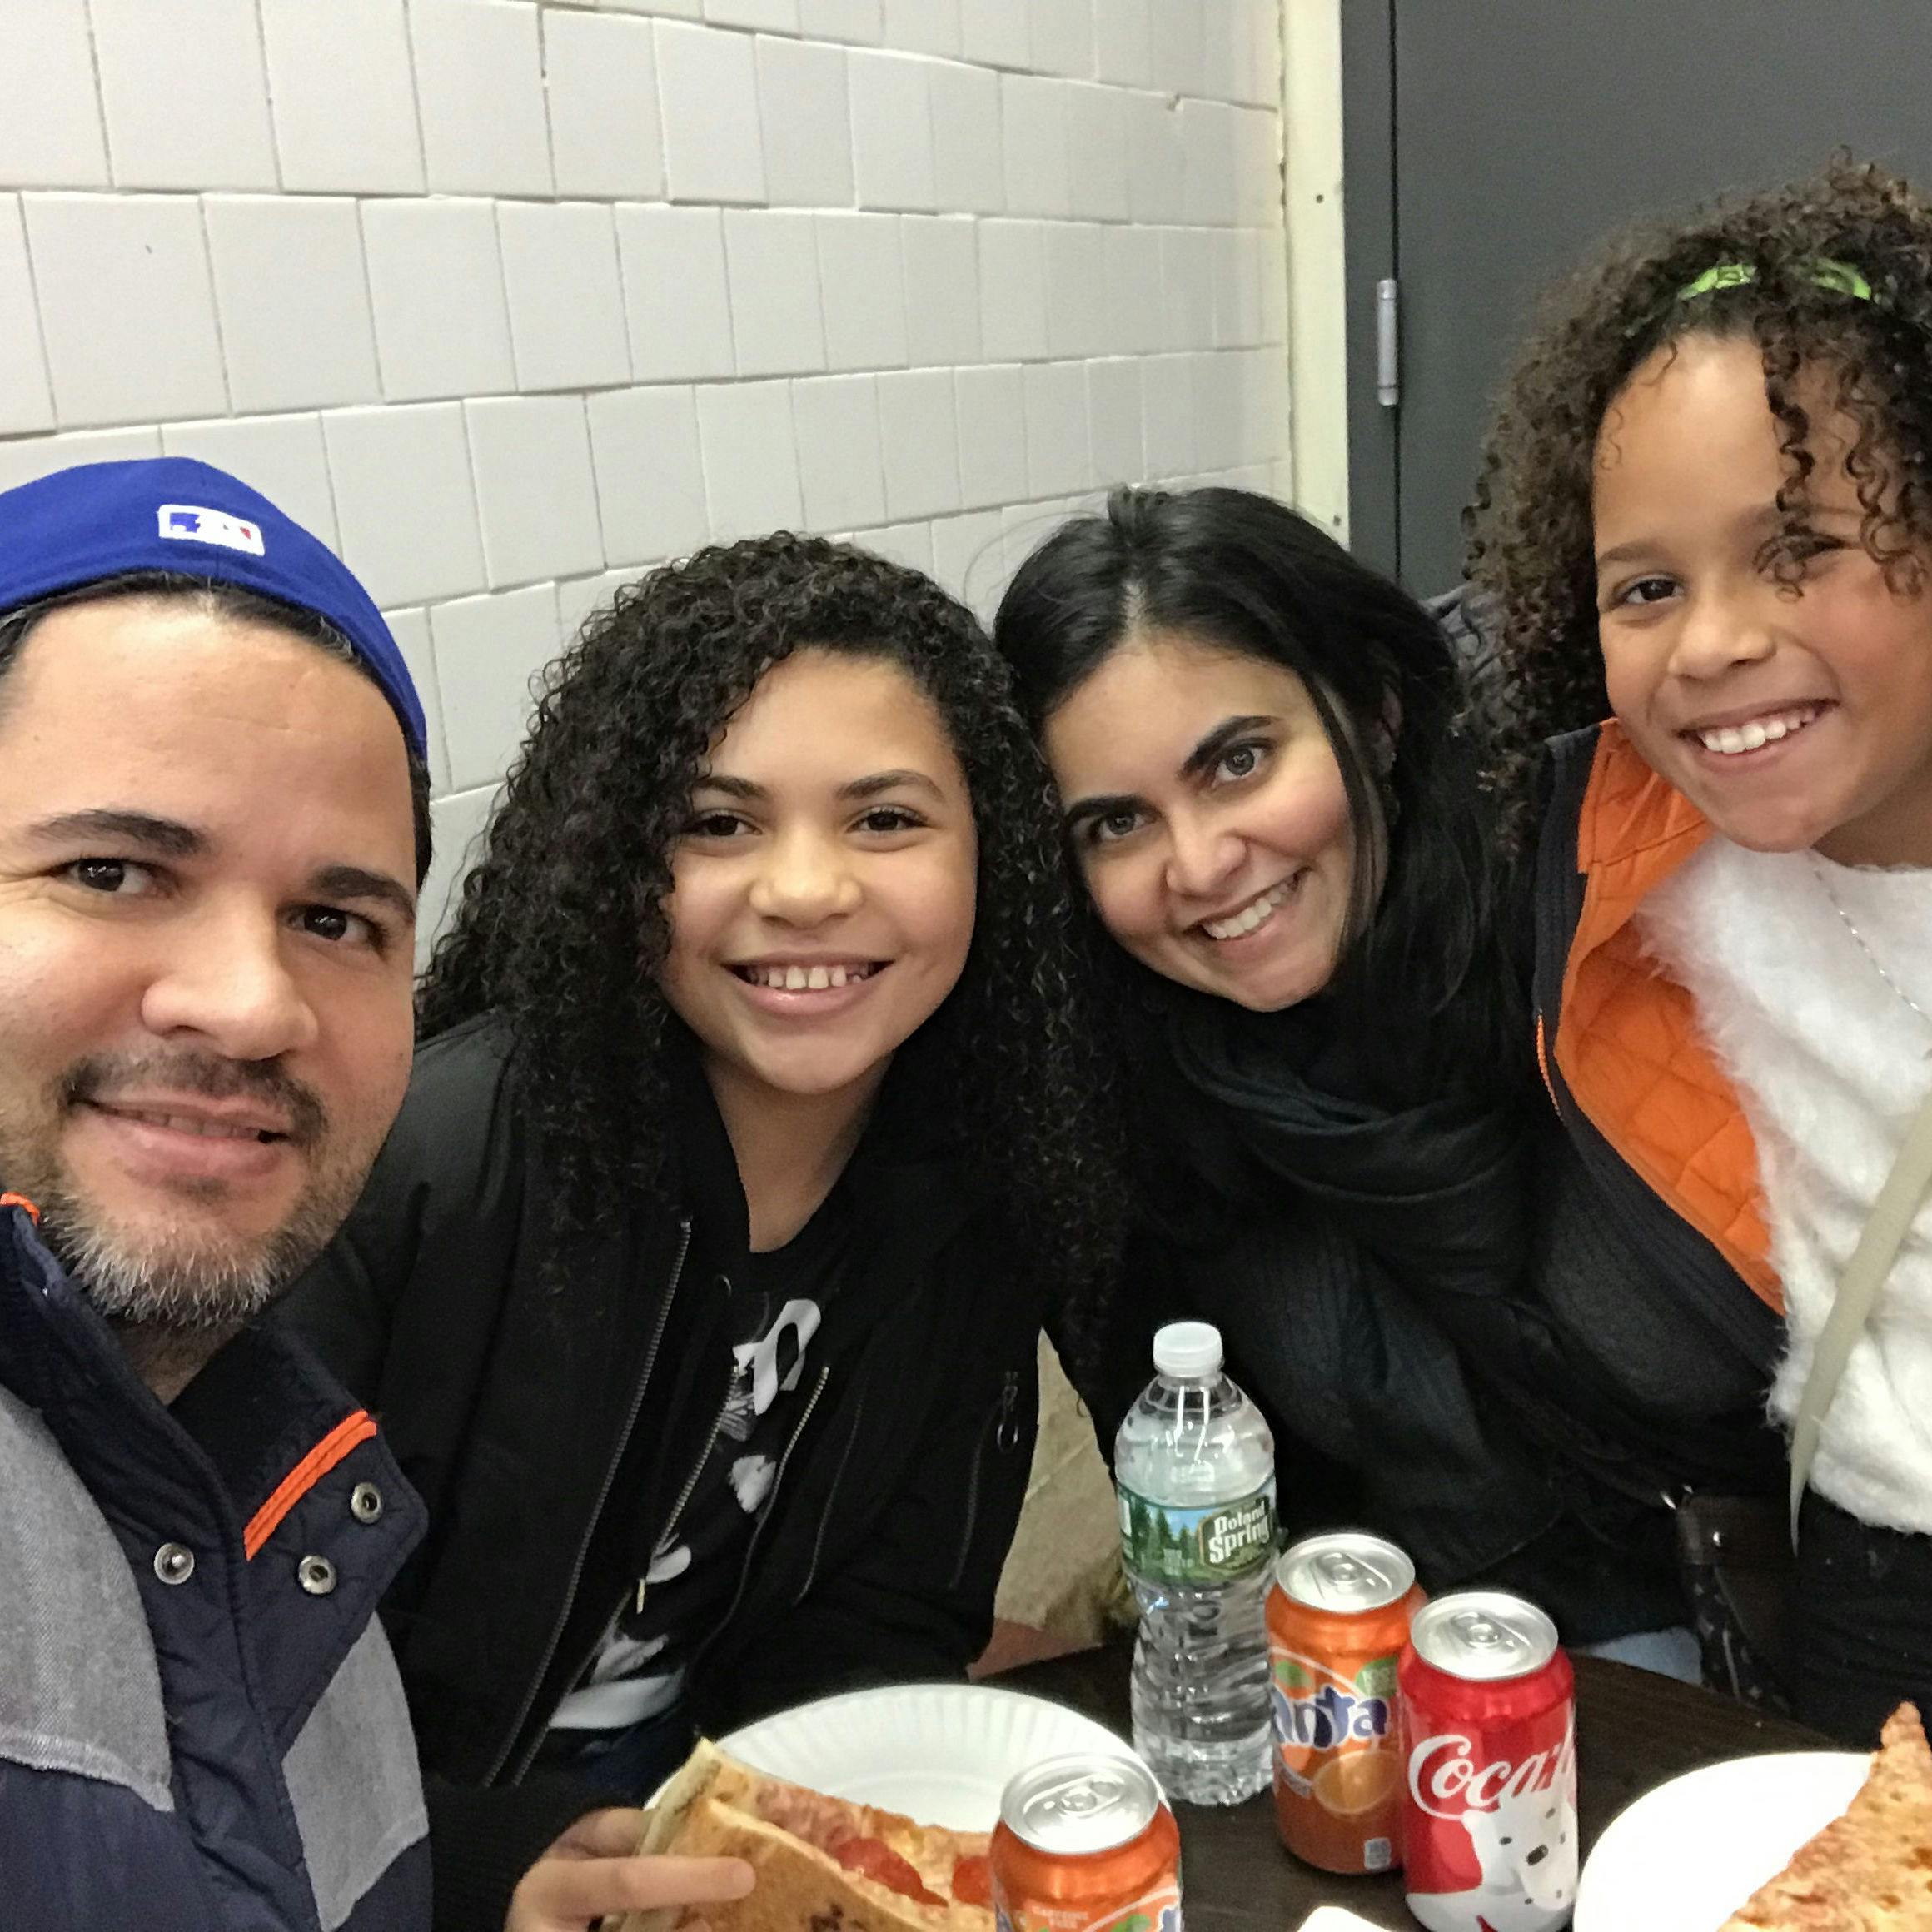 Even though we live in Florida, there is no Pizza like NY Pizza. Trip to the big apple to eat good food and visit our family.